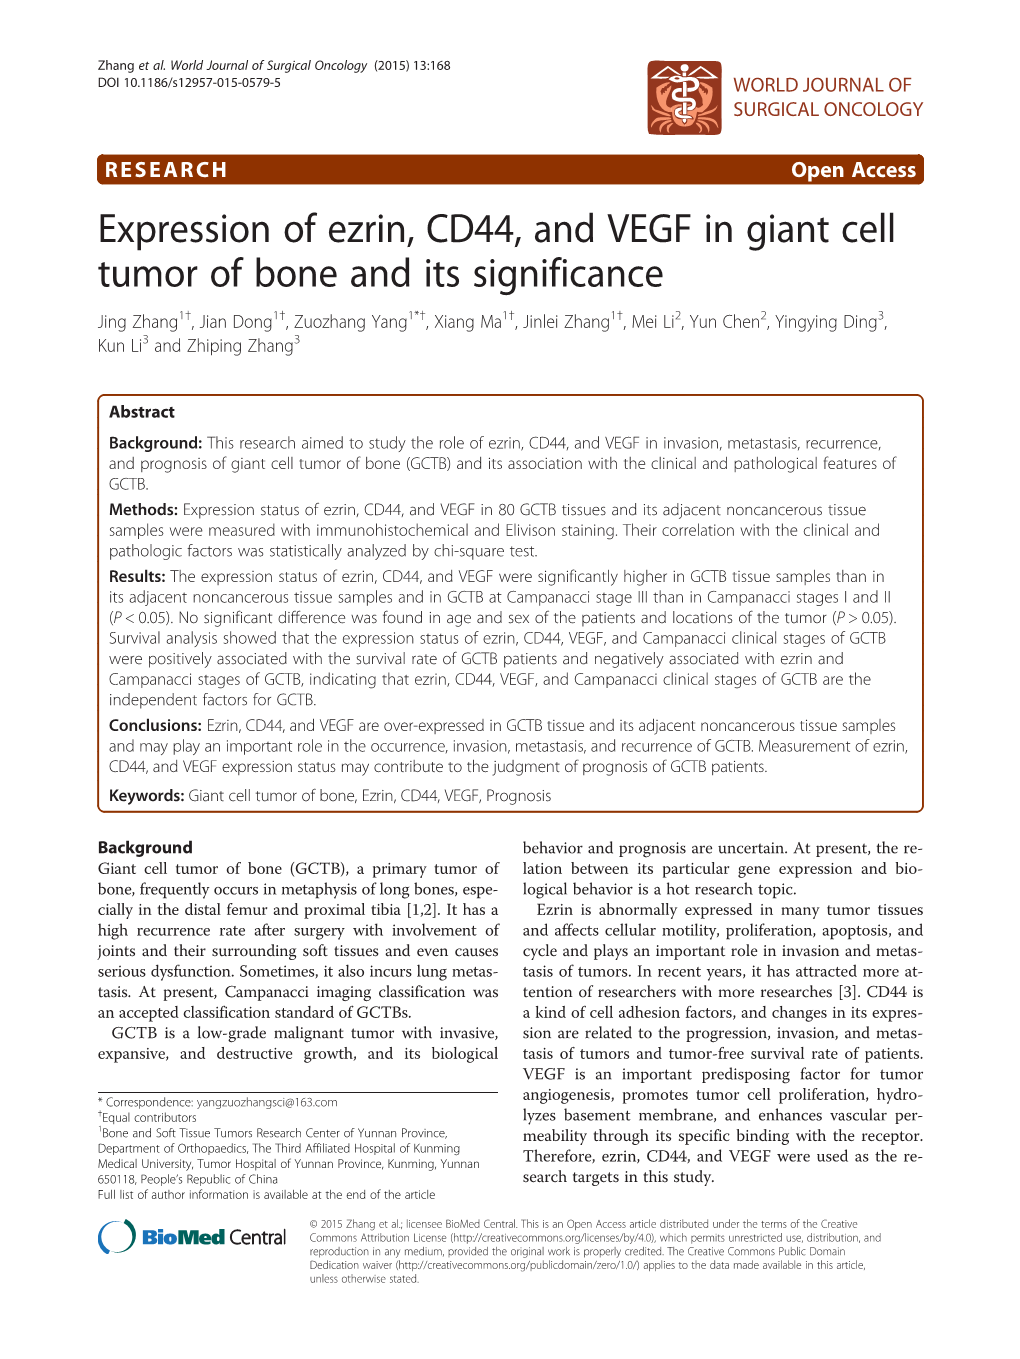 Expression of Ezrin, CD44, and VEGF in Giant Cell Tumor of Bone and Its